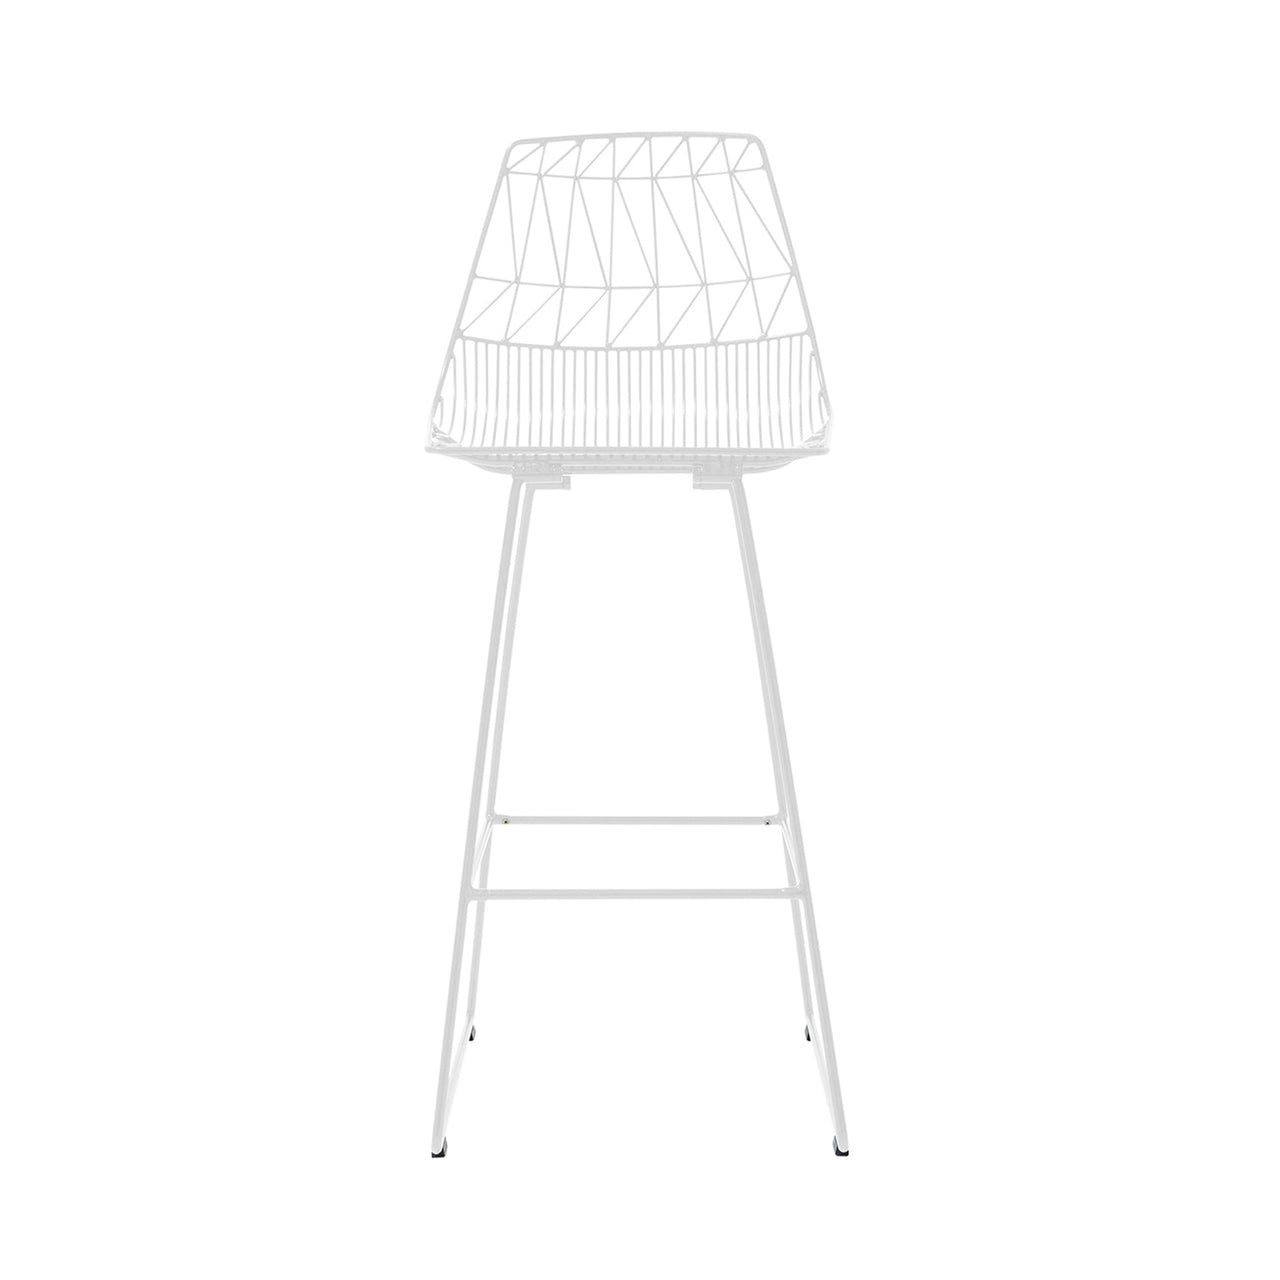 Lucy Bar + Counter Stool: Color + Bar + White + Without Seat Pad